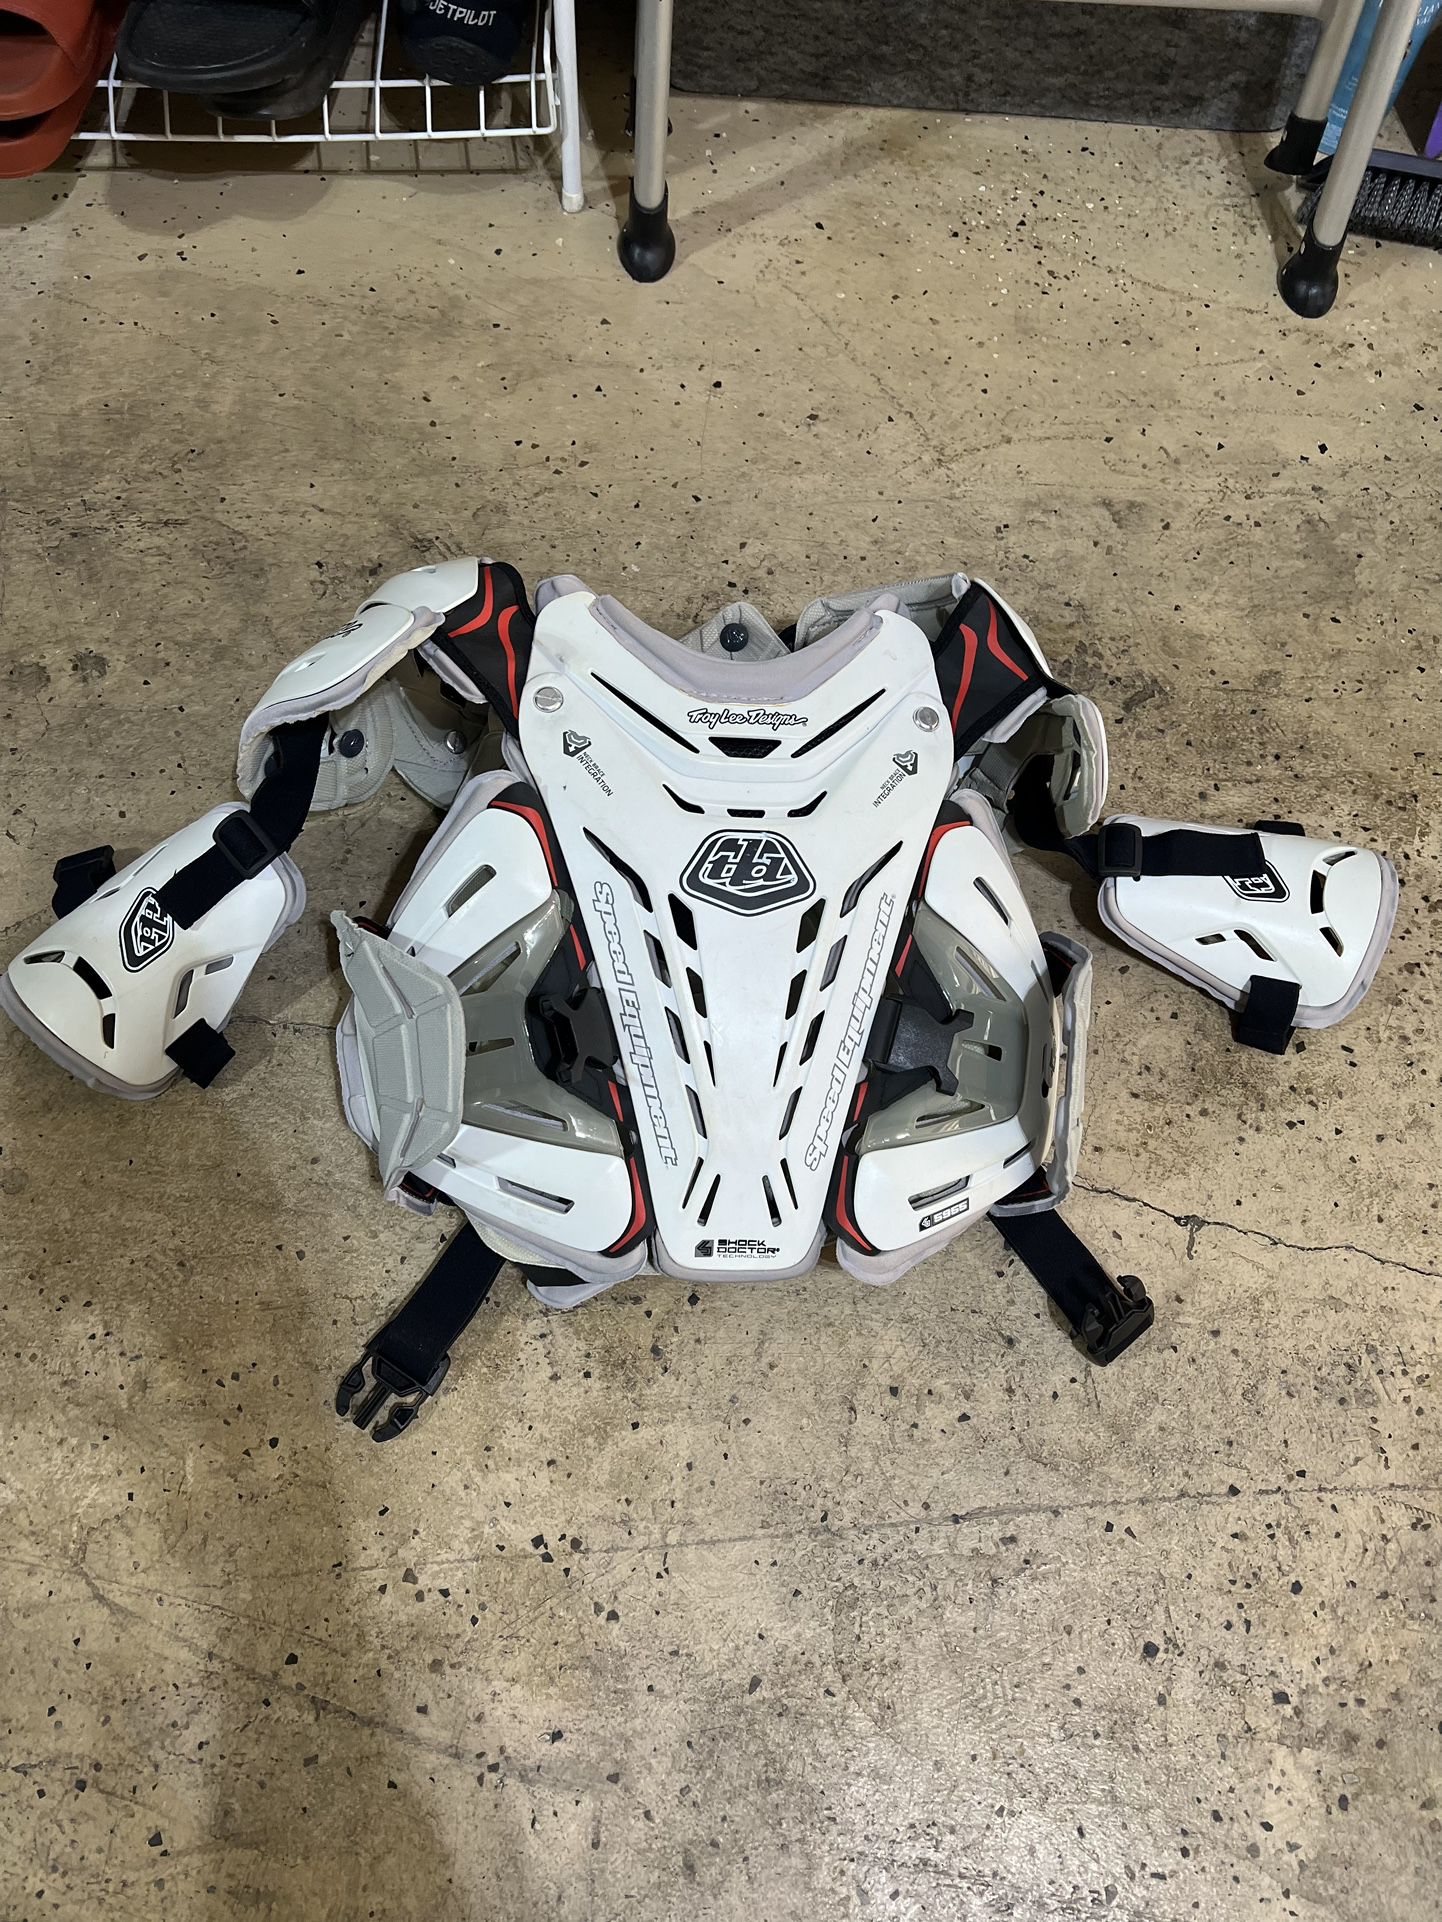 Chest Protector 